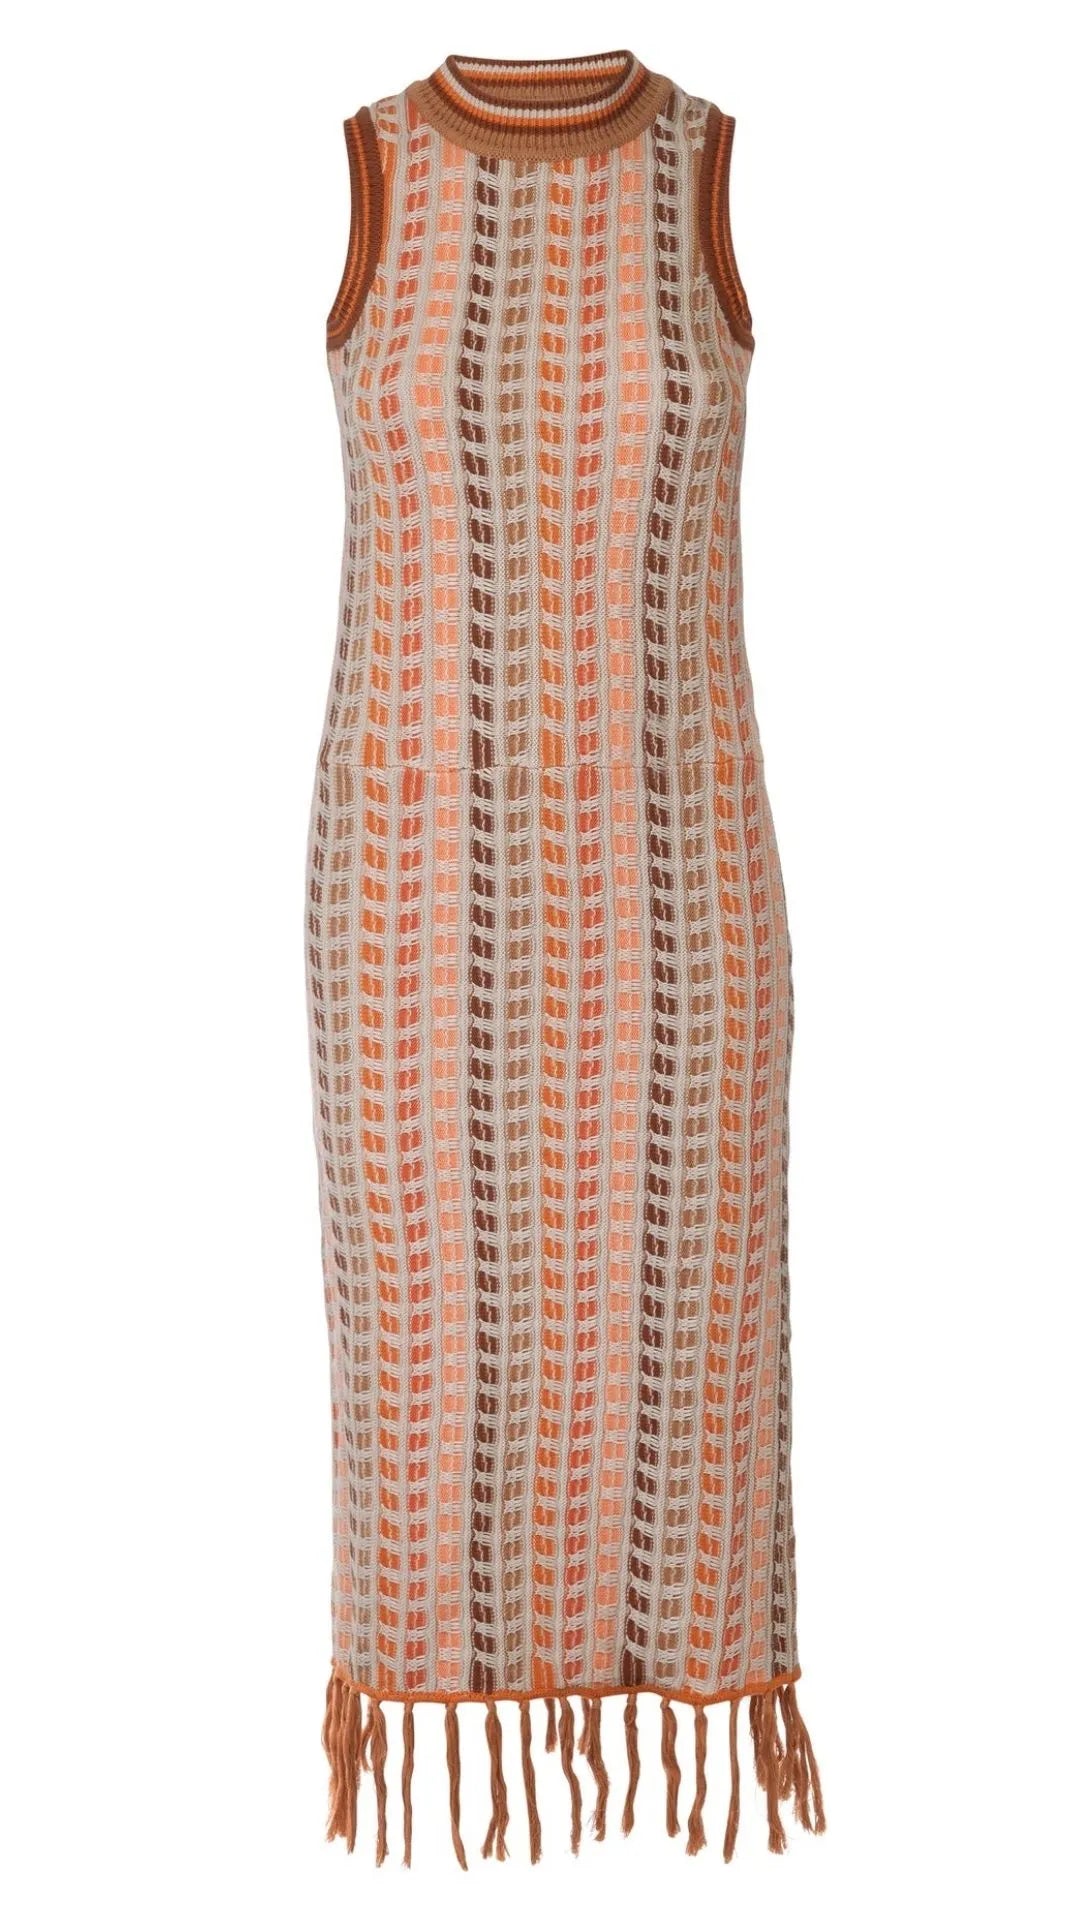 Dodo Bar Or Bono Dress. Hand crocheted in 100% cotton it is sleeveless and midi in length. The botton hem has a fringe. It features a beautiful blend of ecru, orange and browns. Product photo shown from front view.